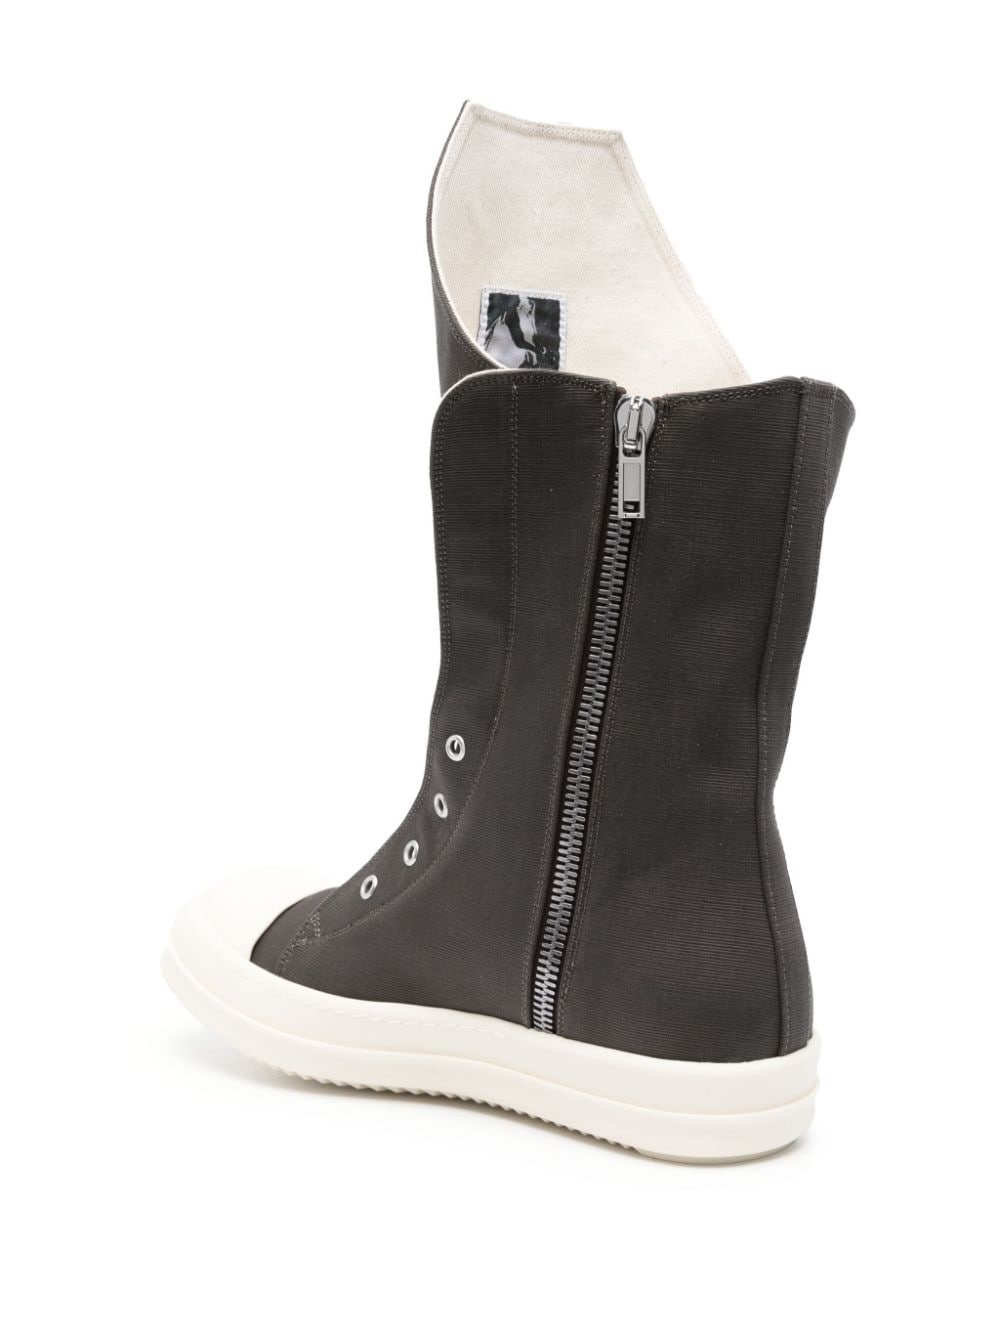 oversize-tongue sneaker boots - 3